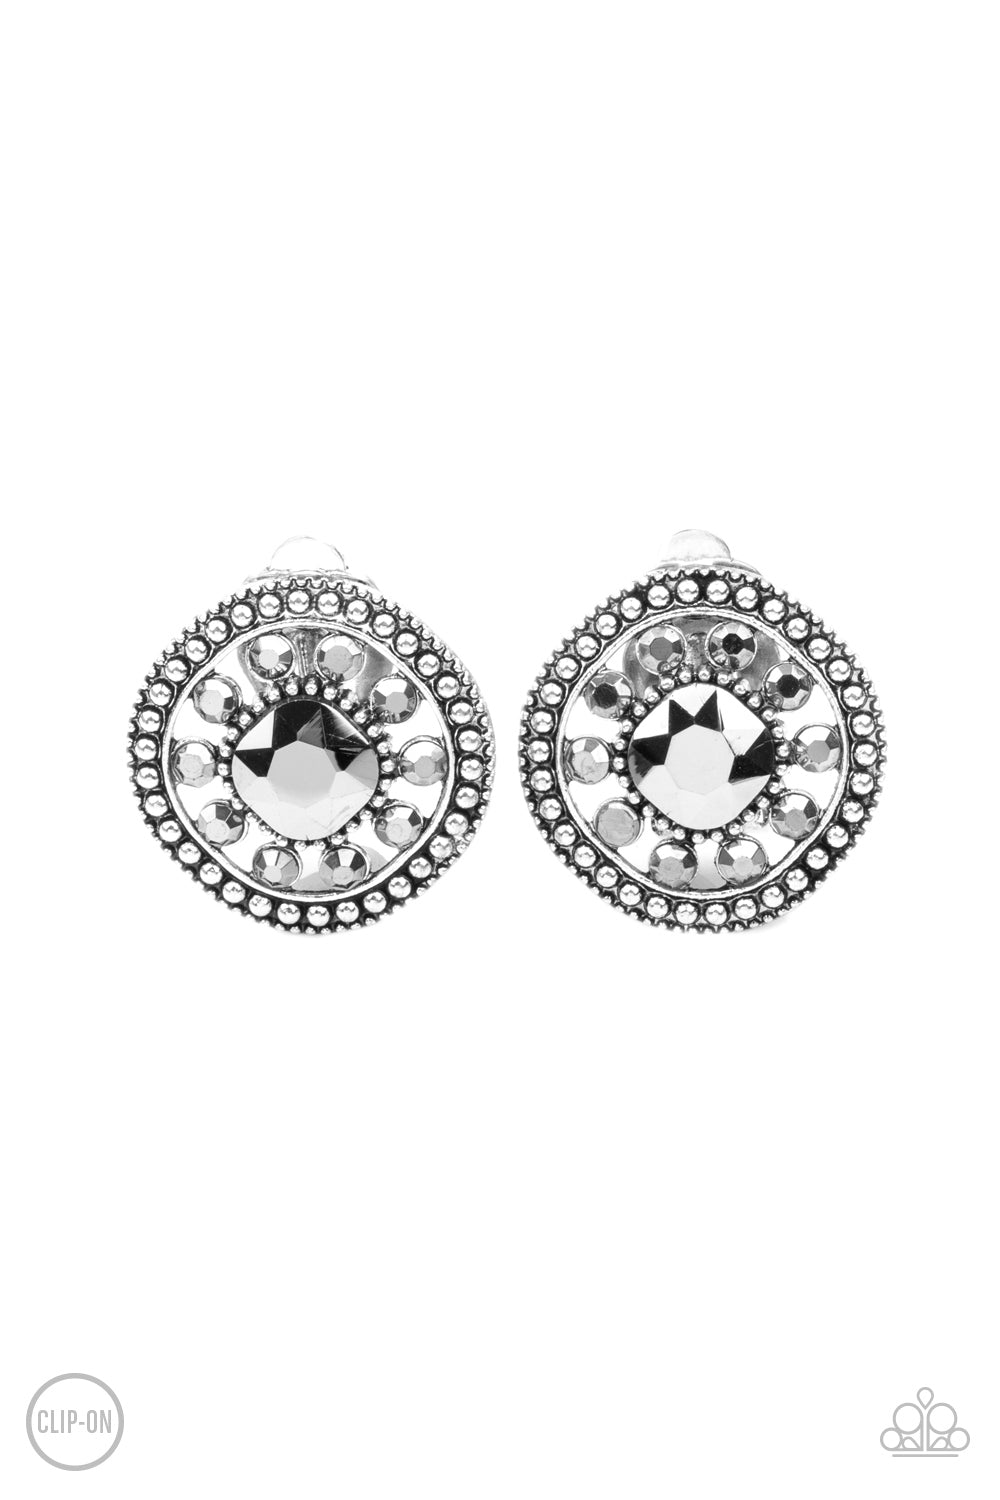 Featuring an oversized center, a hematite rhinestone encrusted flower blooms across the silver center of a studded frame for a sparkly finish. Earring attaches to a standard clip-on fitting.